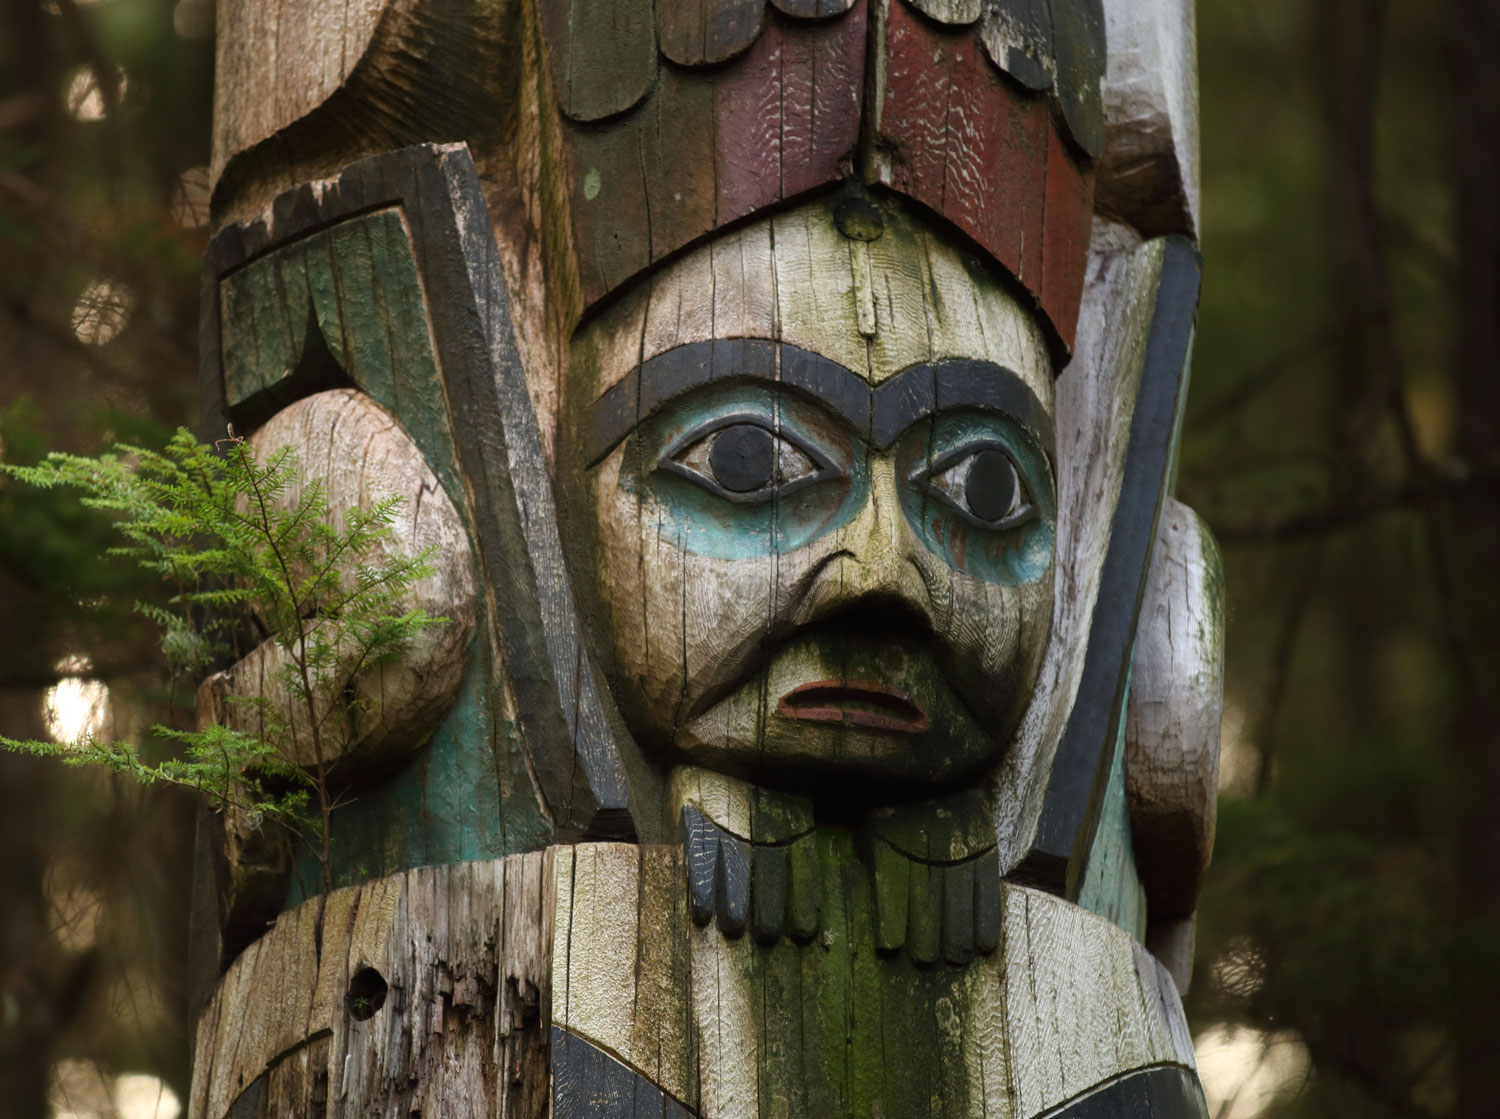 Some of the totems in the park are showing signs of age. New totems are being carved at the carving shed in Kasaan.